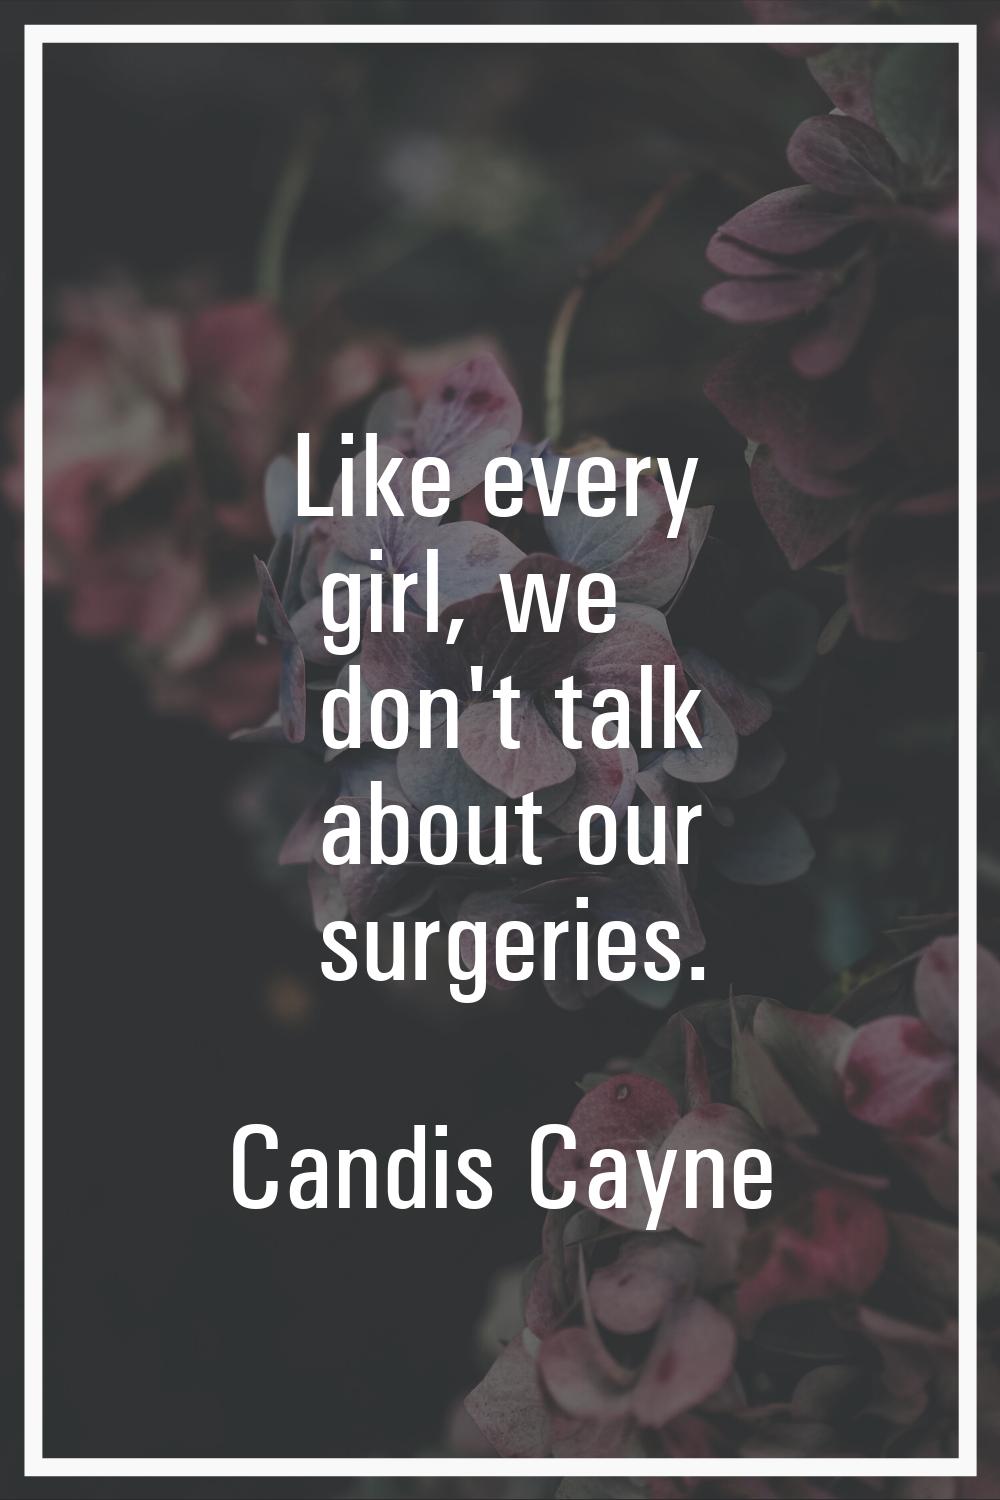 Like every girl, we don't talk about our surgeries.